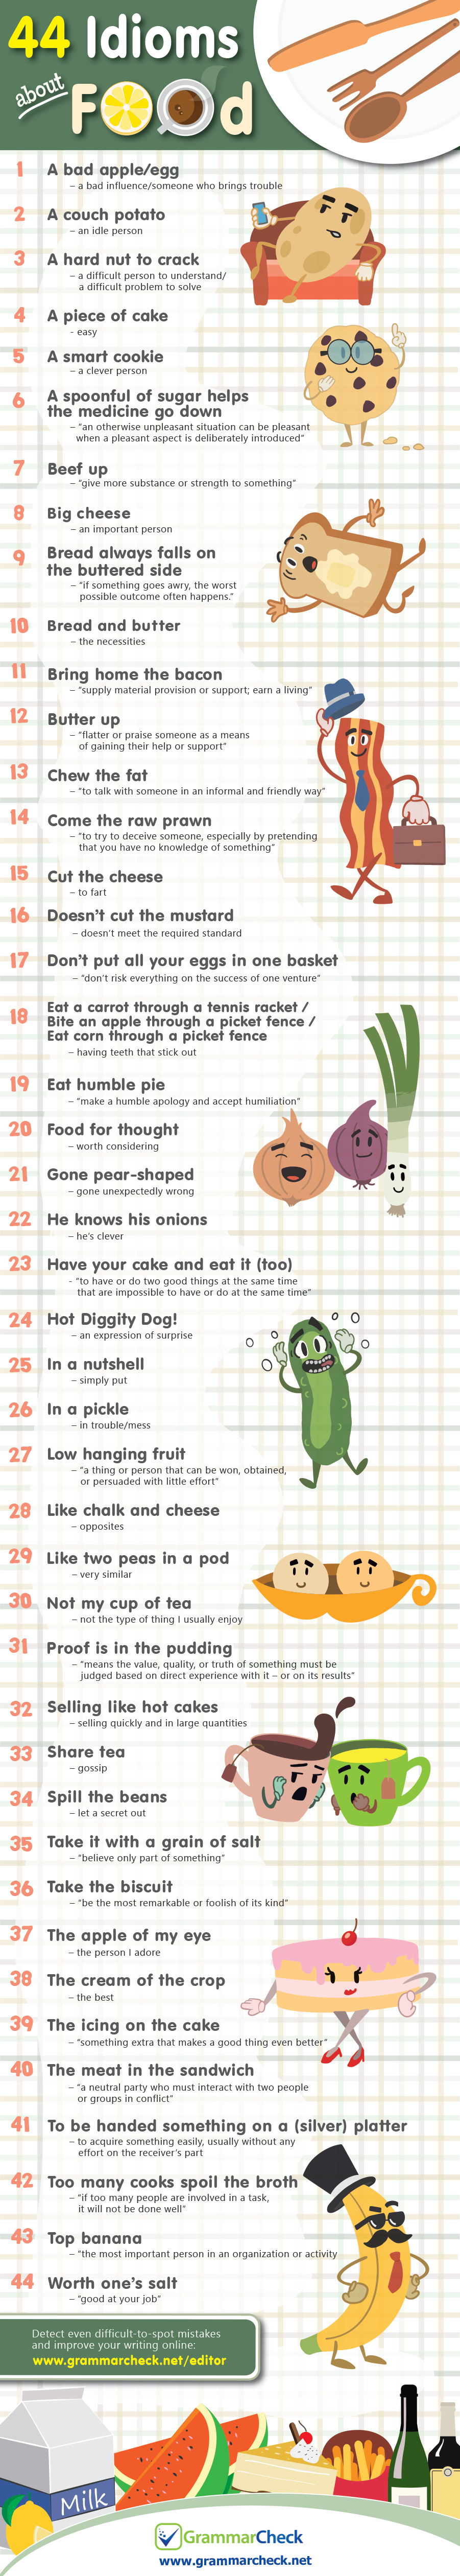 44 Idioms about Food (Infographic)